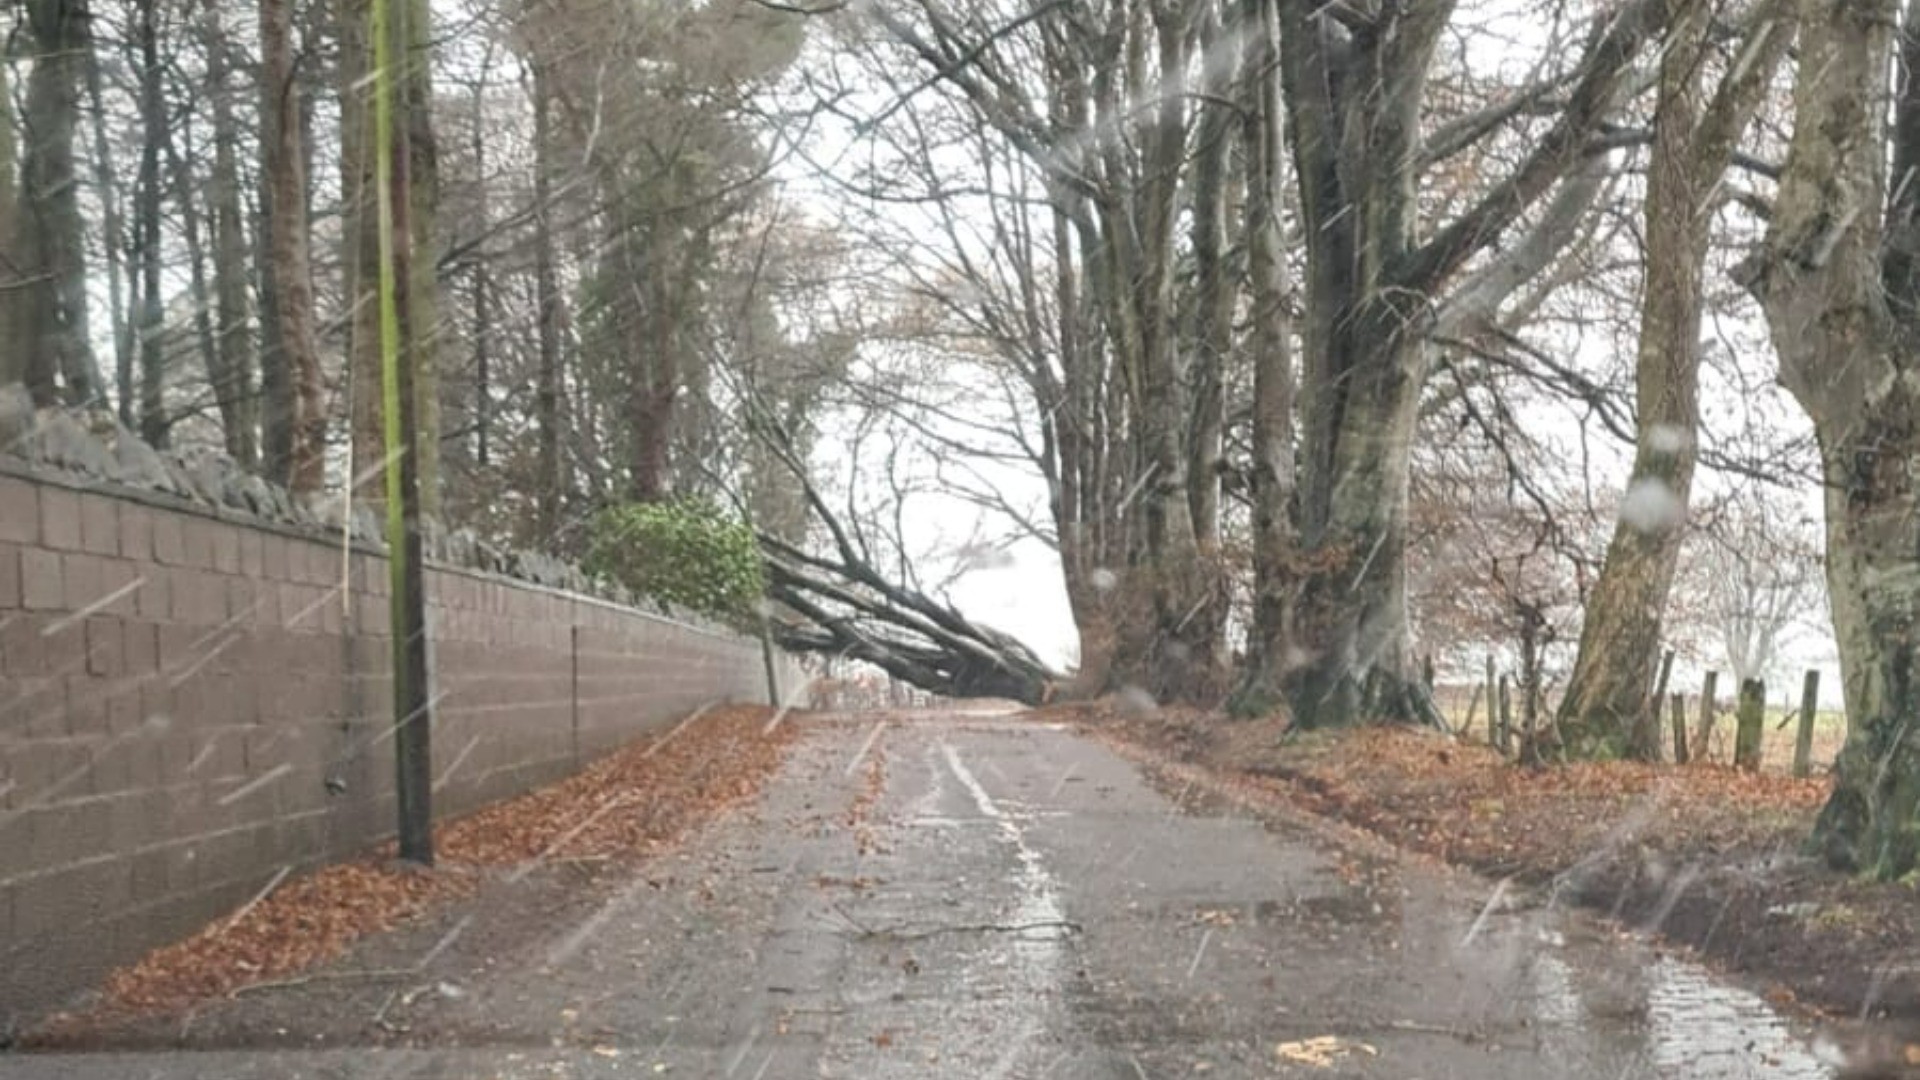 A road in Symington was blocked by a fallen tree during Storm Barra. (Sam Somerville/STV News)